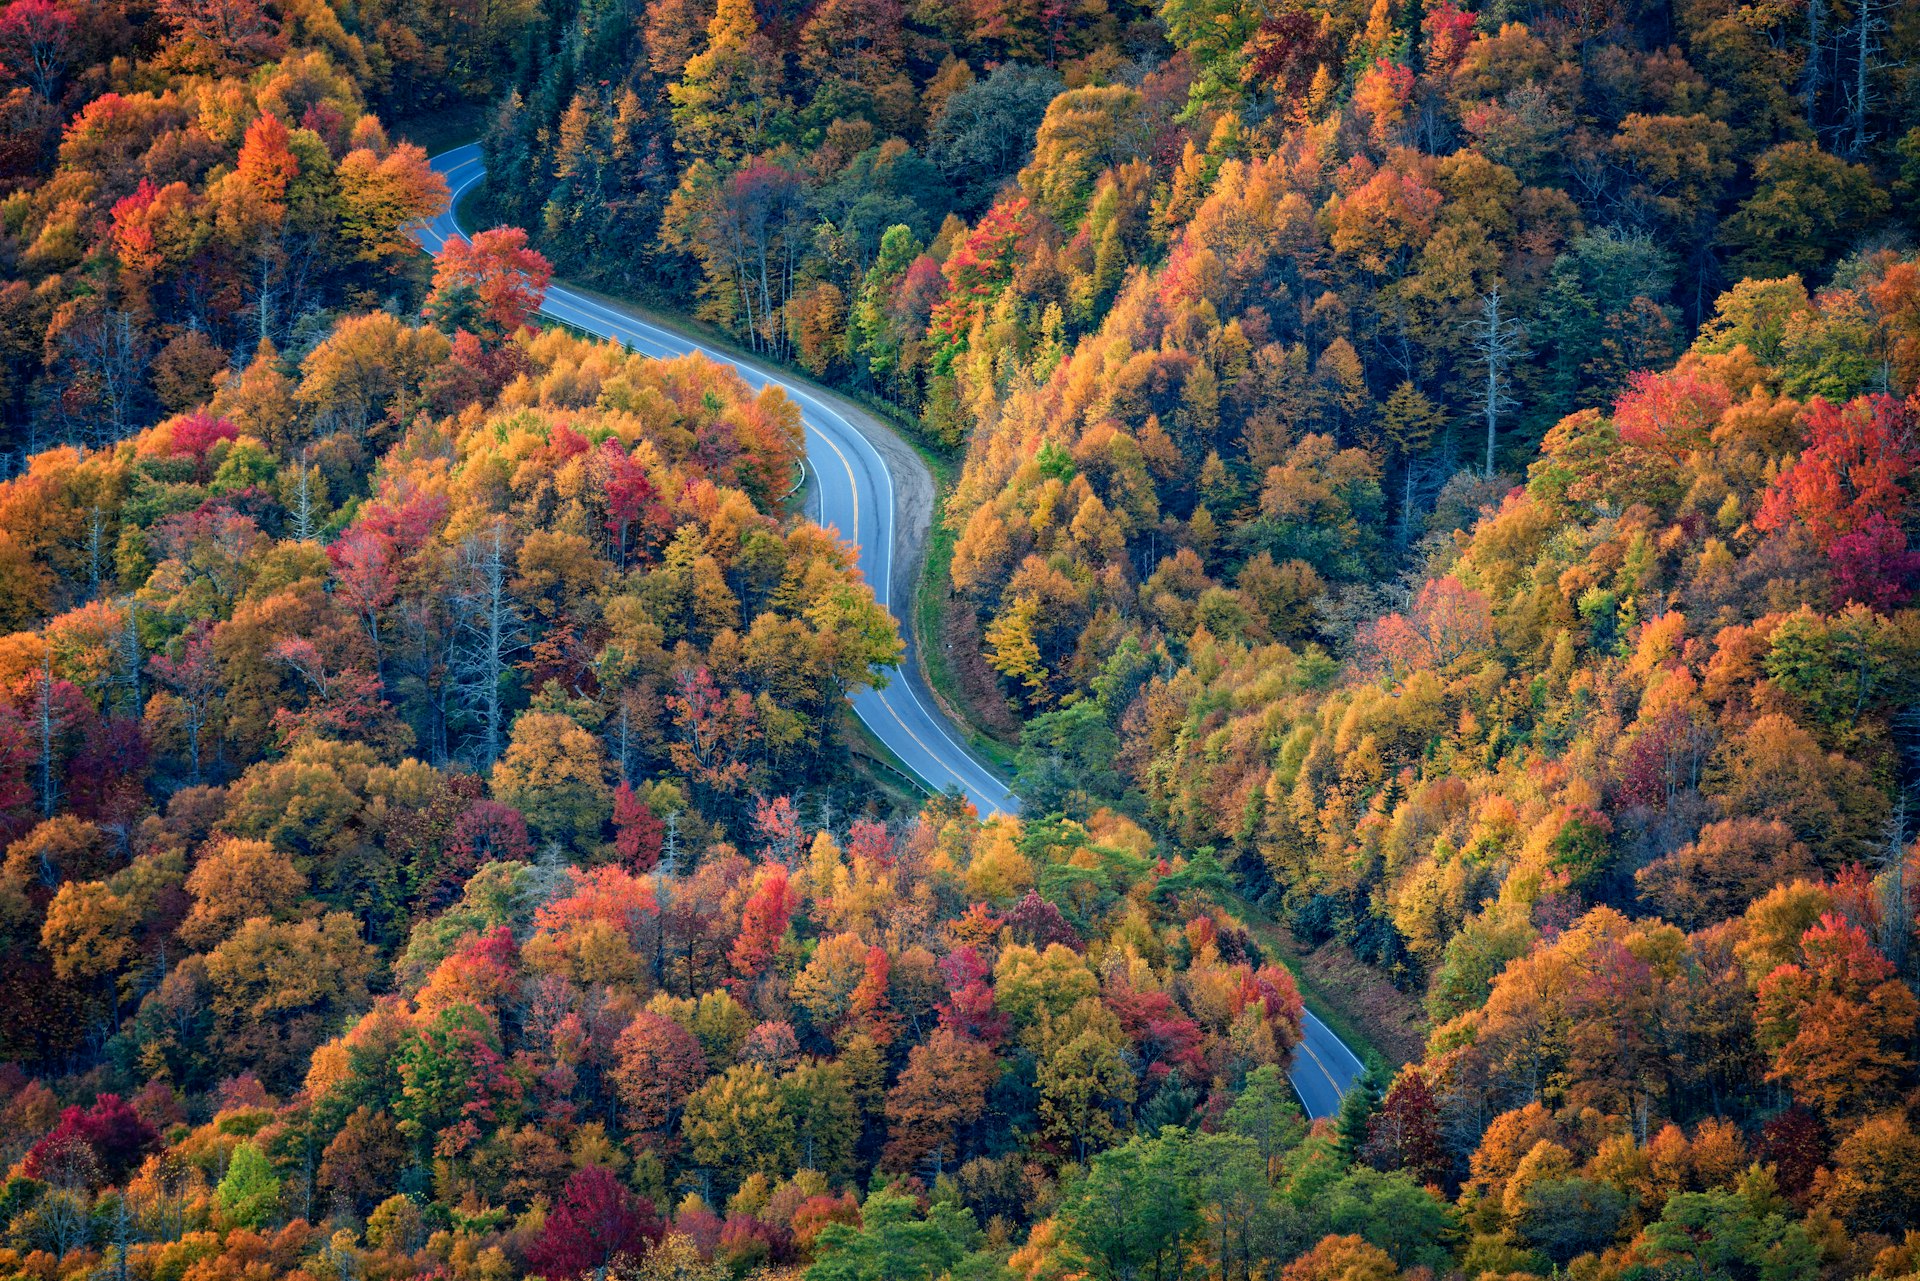 A road cuts through thick woodland, with leaves in warm fall colors of red, orange and gold